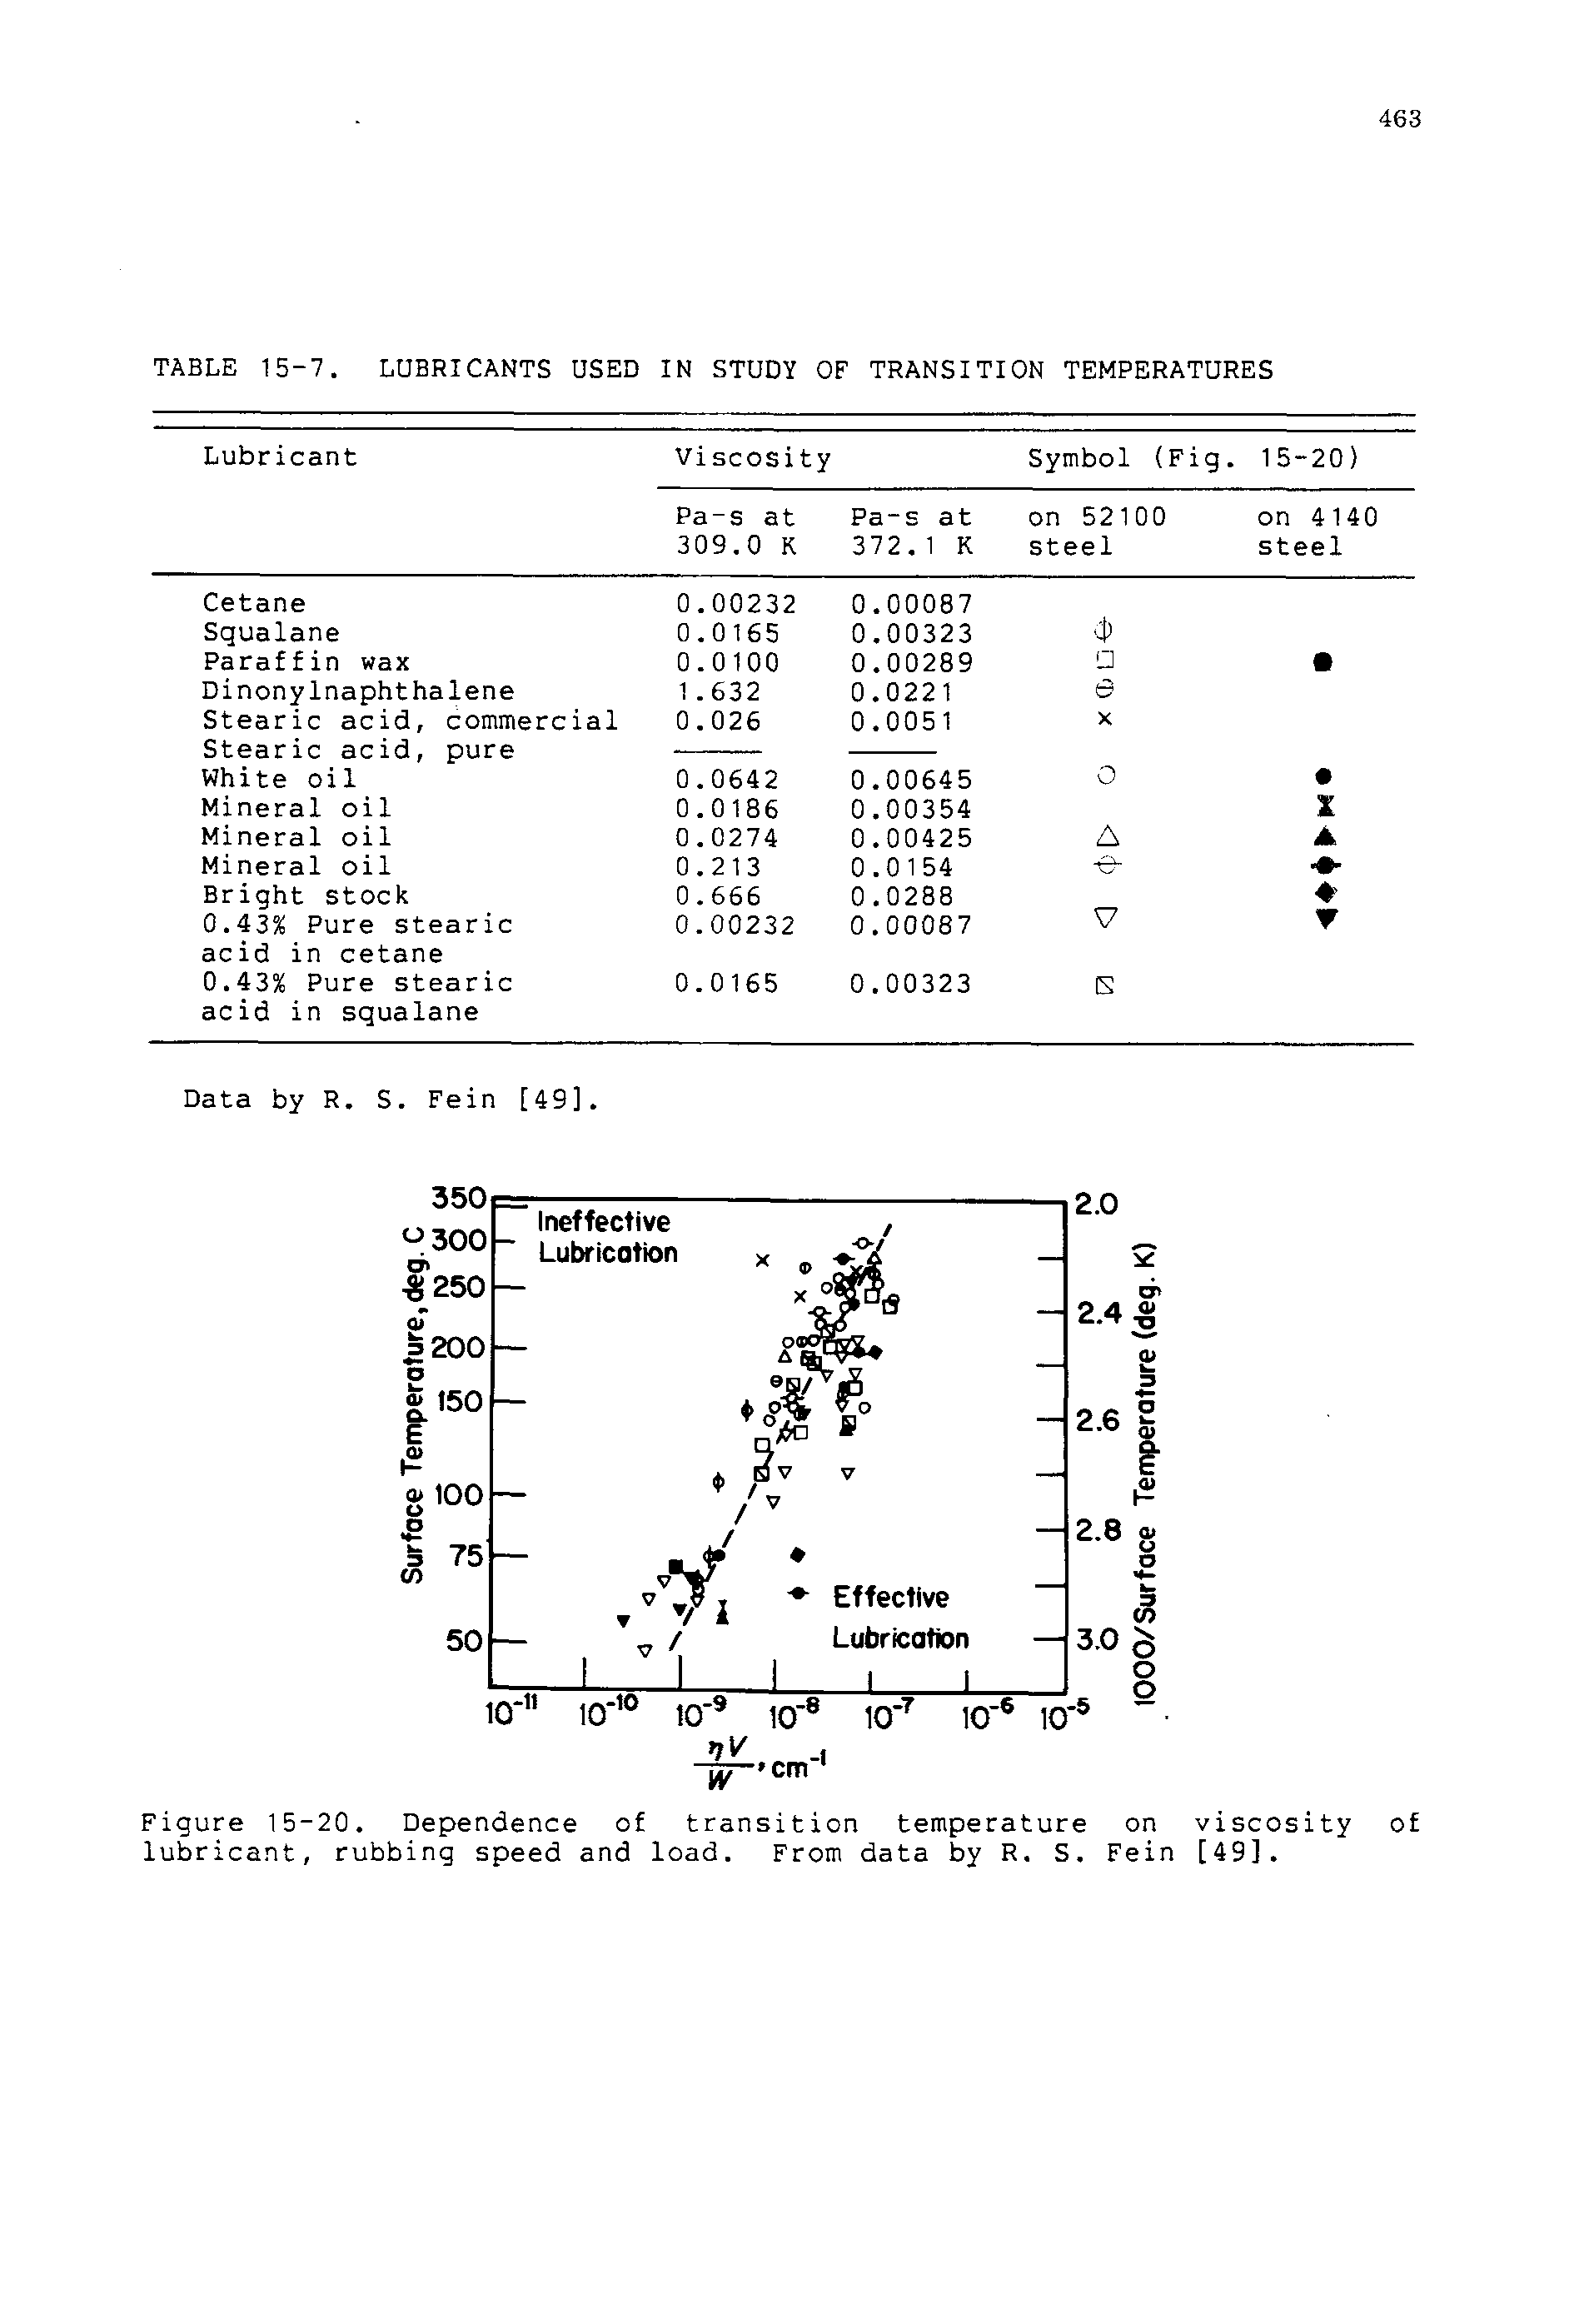 Figure 15-20. Dependence of transition temperature on viscosity lubricant, rubbing speed and load. From data by R. S. Fein [49].